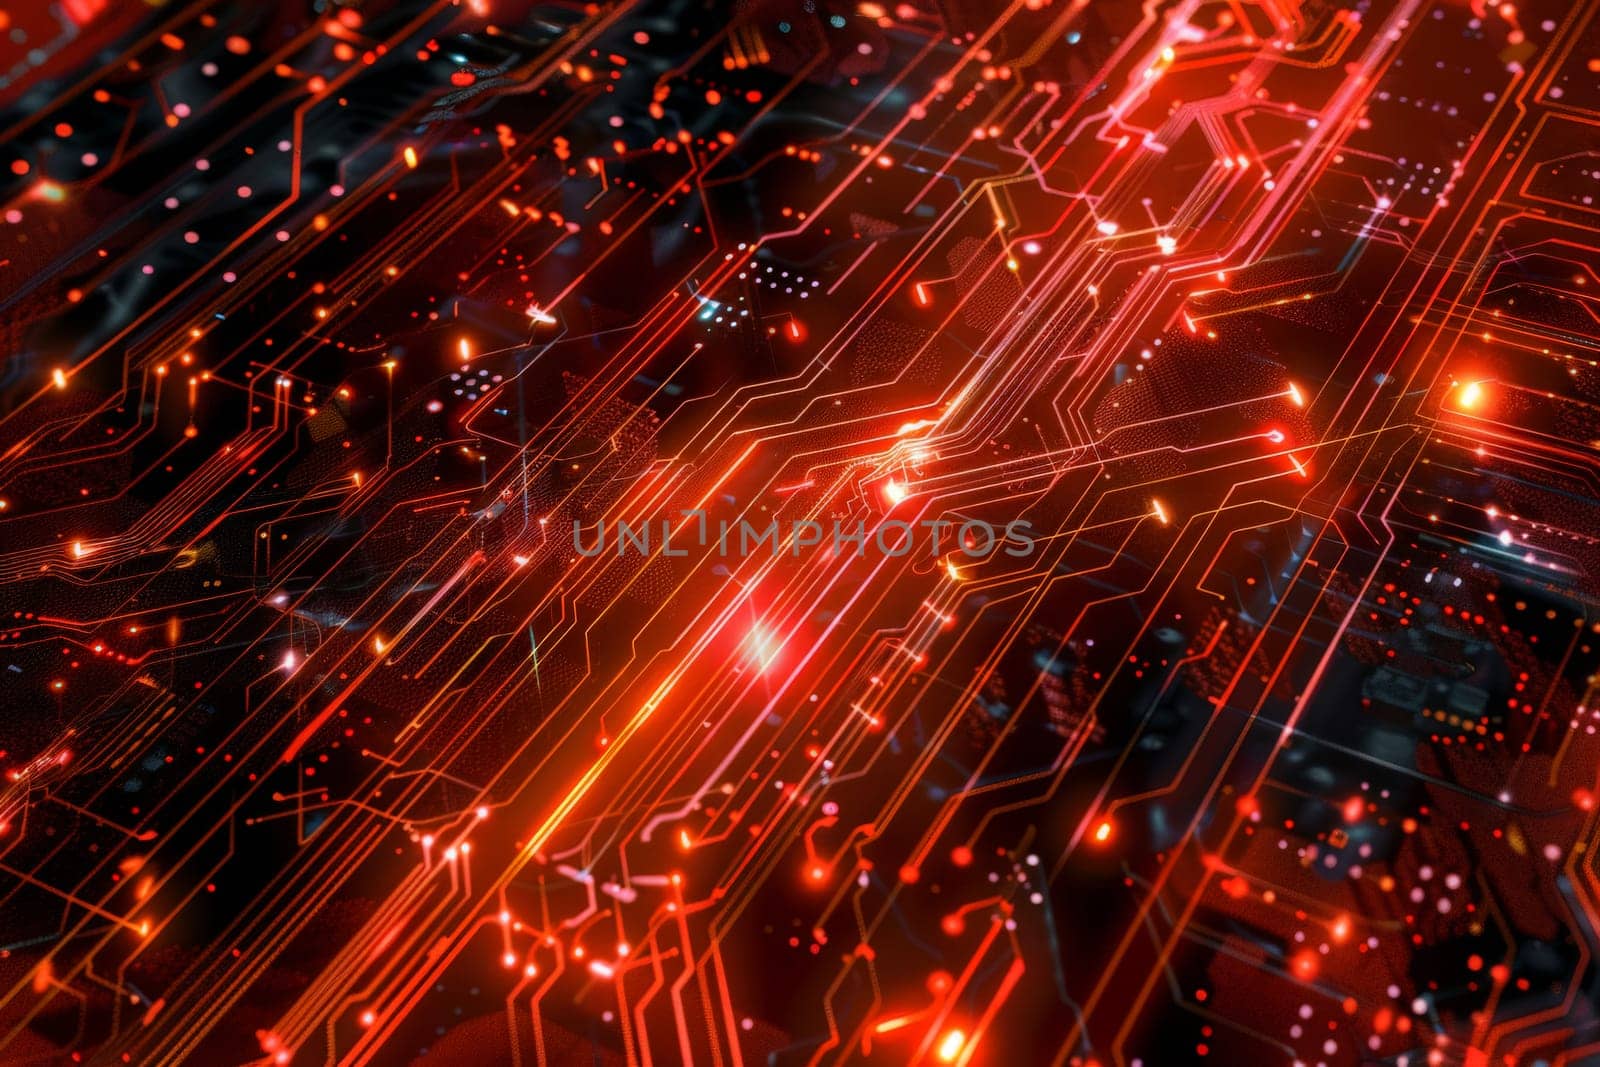 A close up of a circuit board with red and orange lines by nateemee